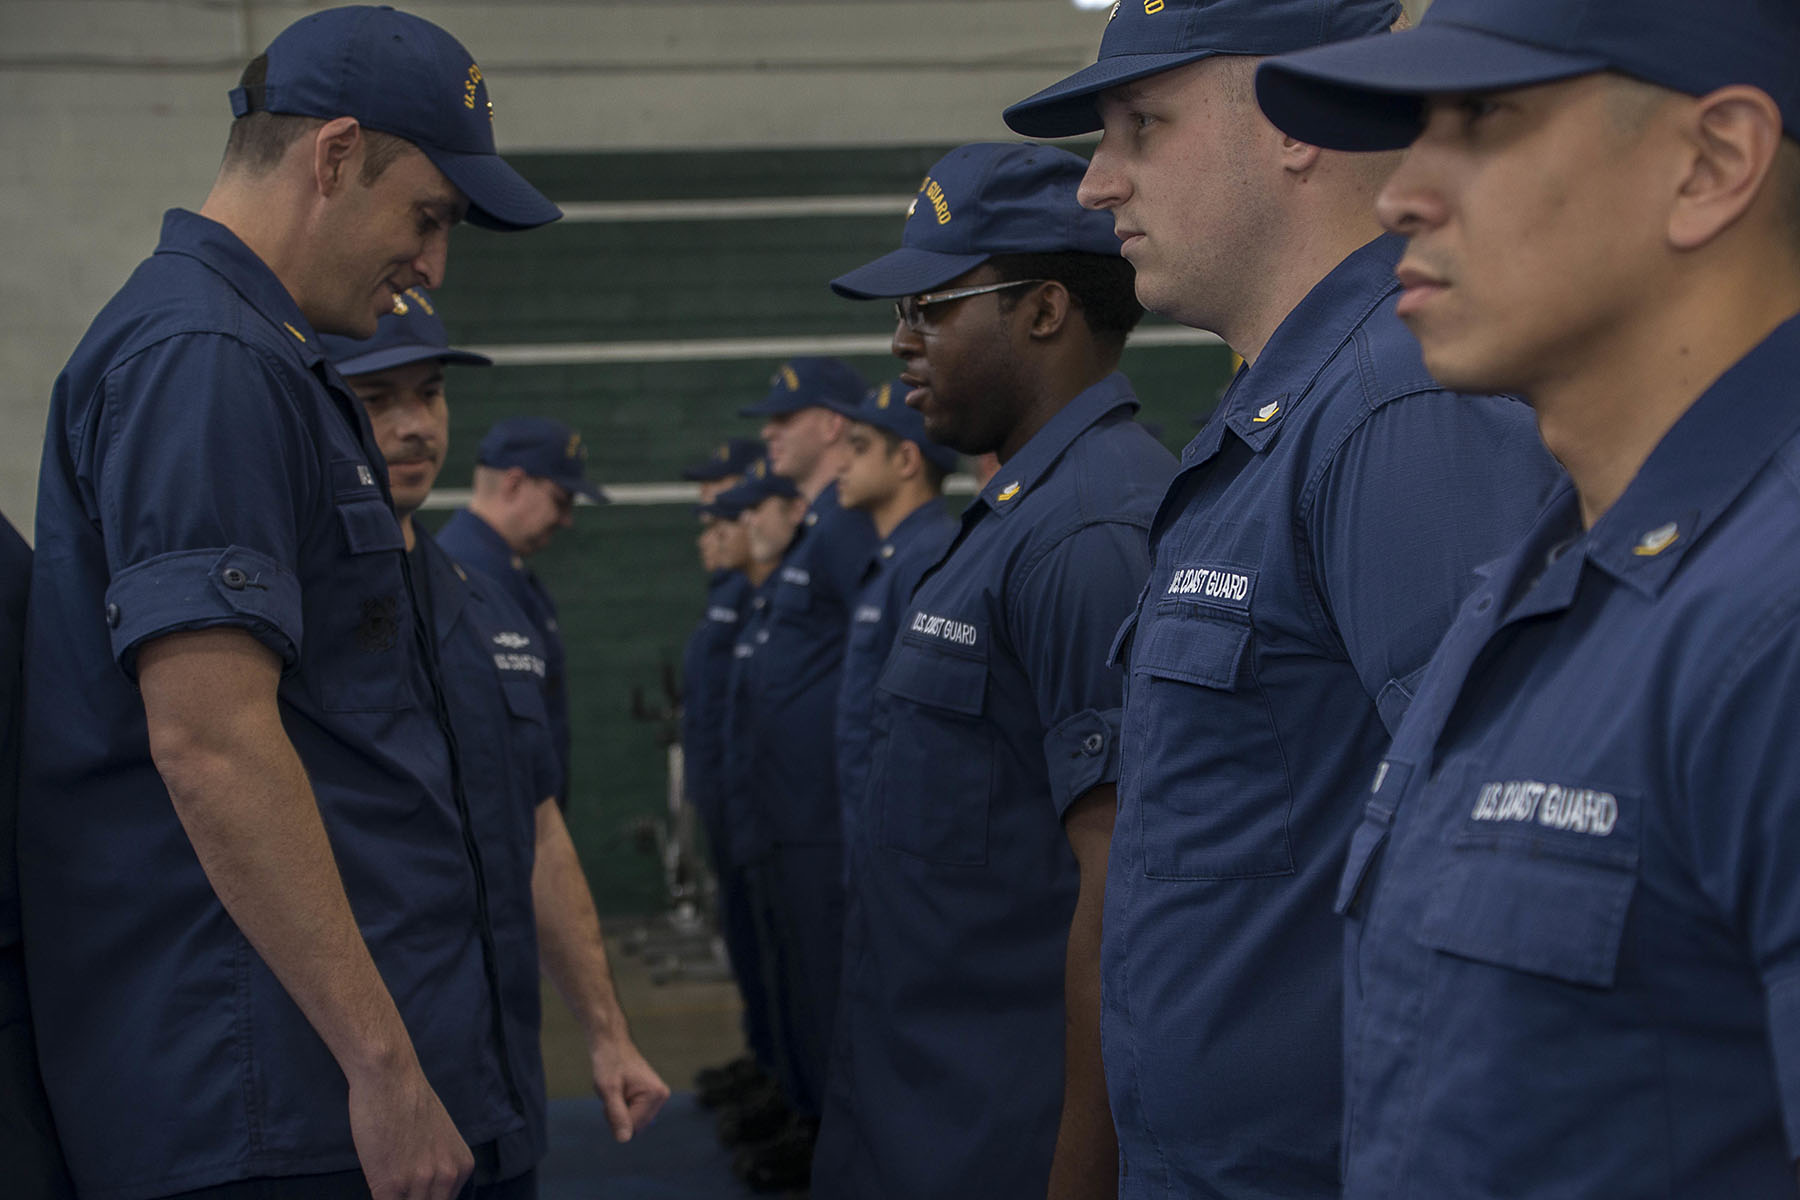 COAST GUARD ACADEMY UNIFORMS Military Academy Traditions OFF